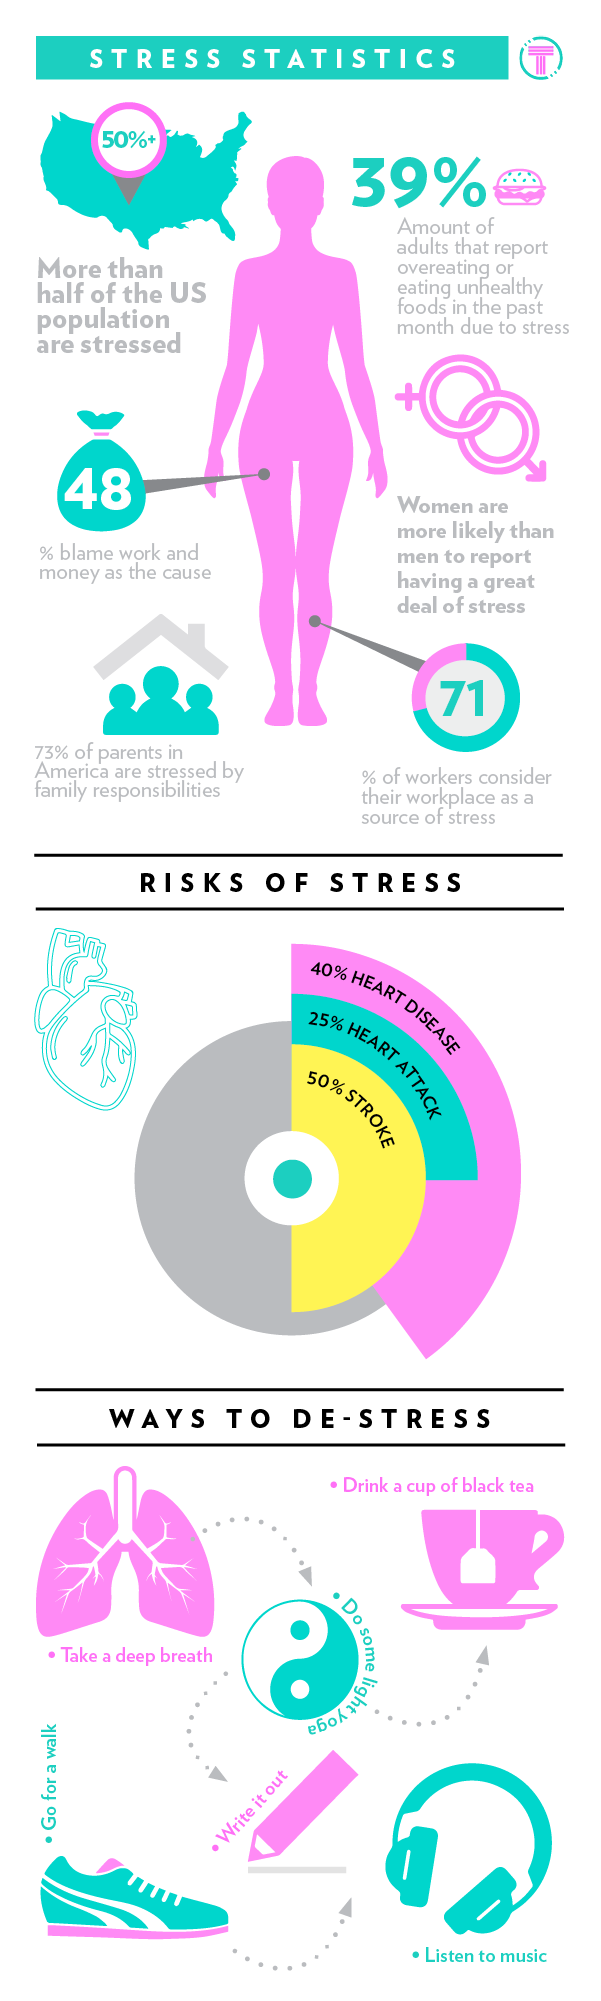 infographic on stress statistics, risks of stress and ways to de-stress